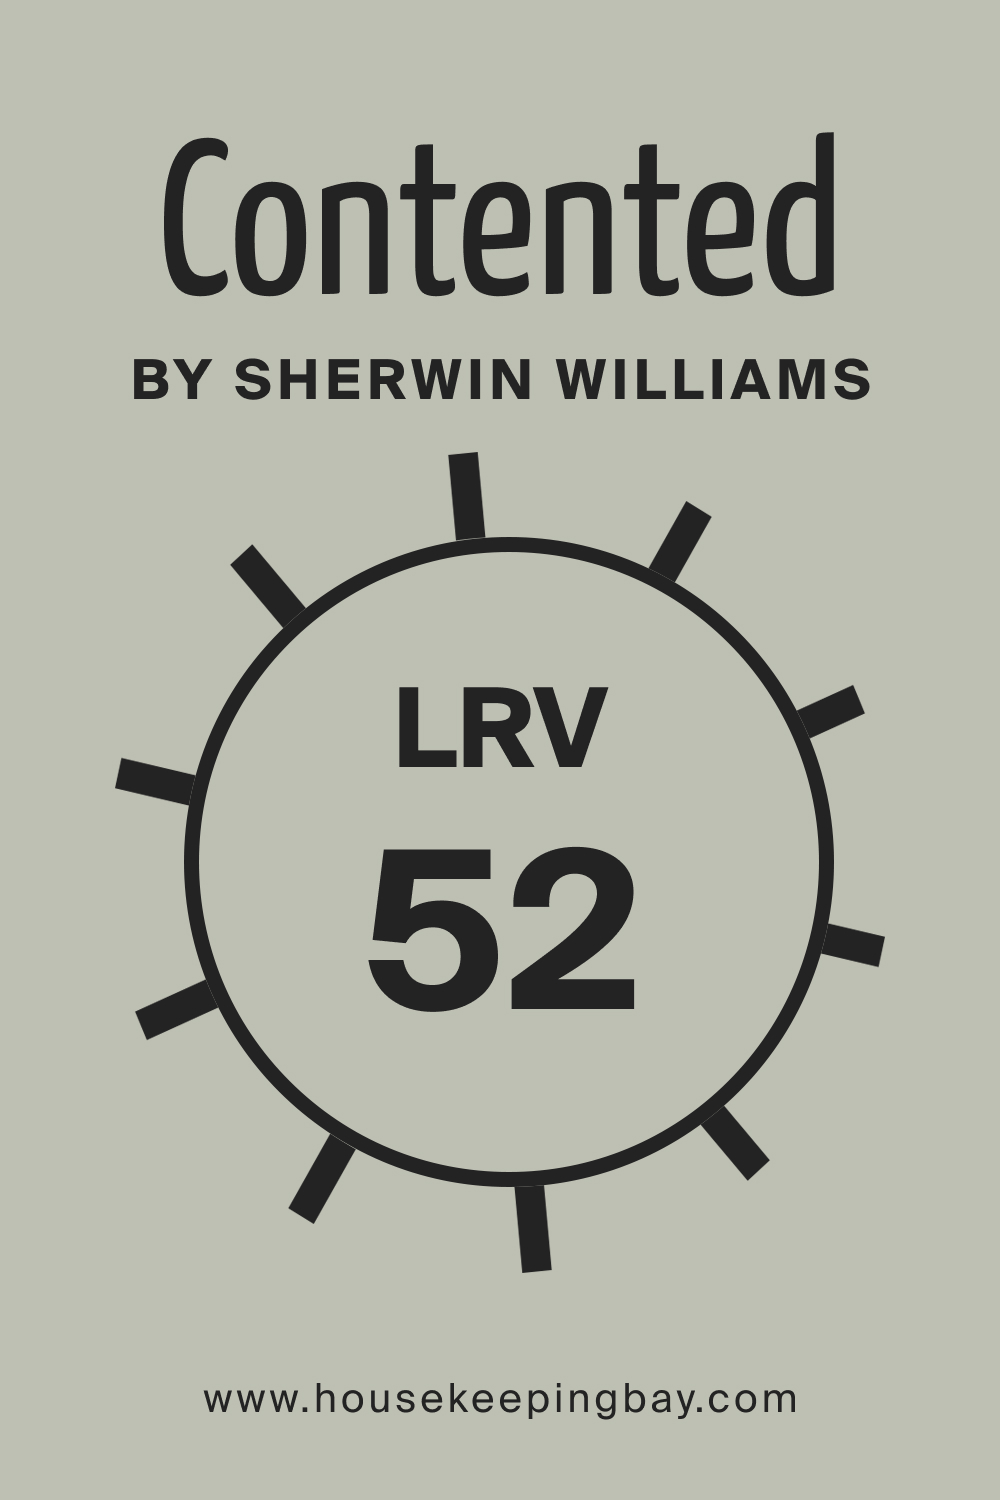 SW 6191 Contented by Sherwin Williams. LRV 52